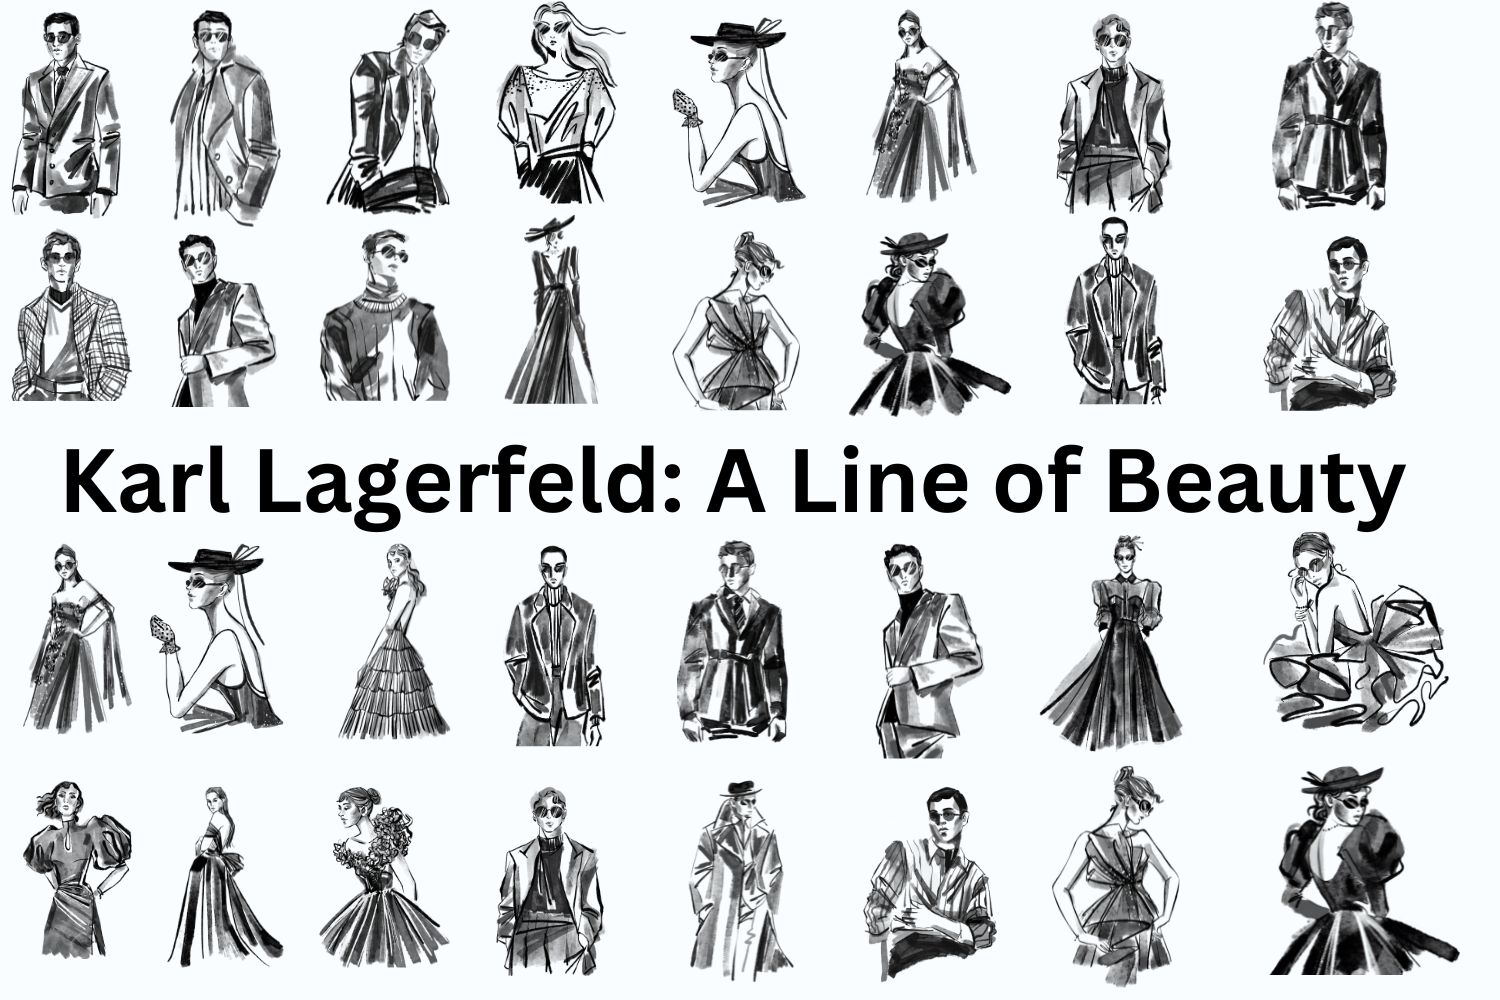 Met Gala theme dedicated to Karl Lagerfeld sparks controversy among ...